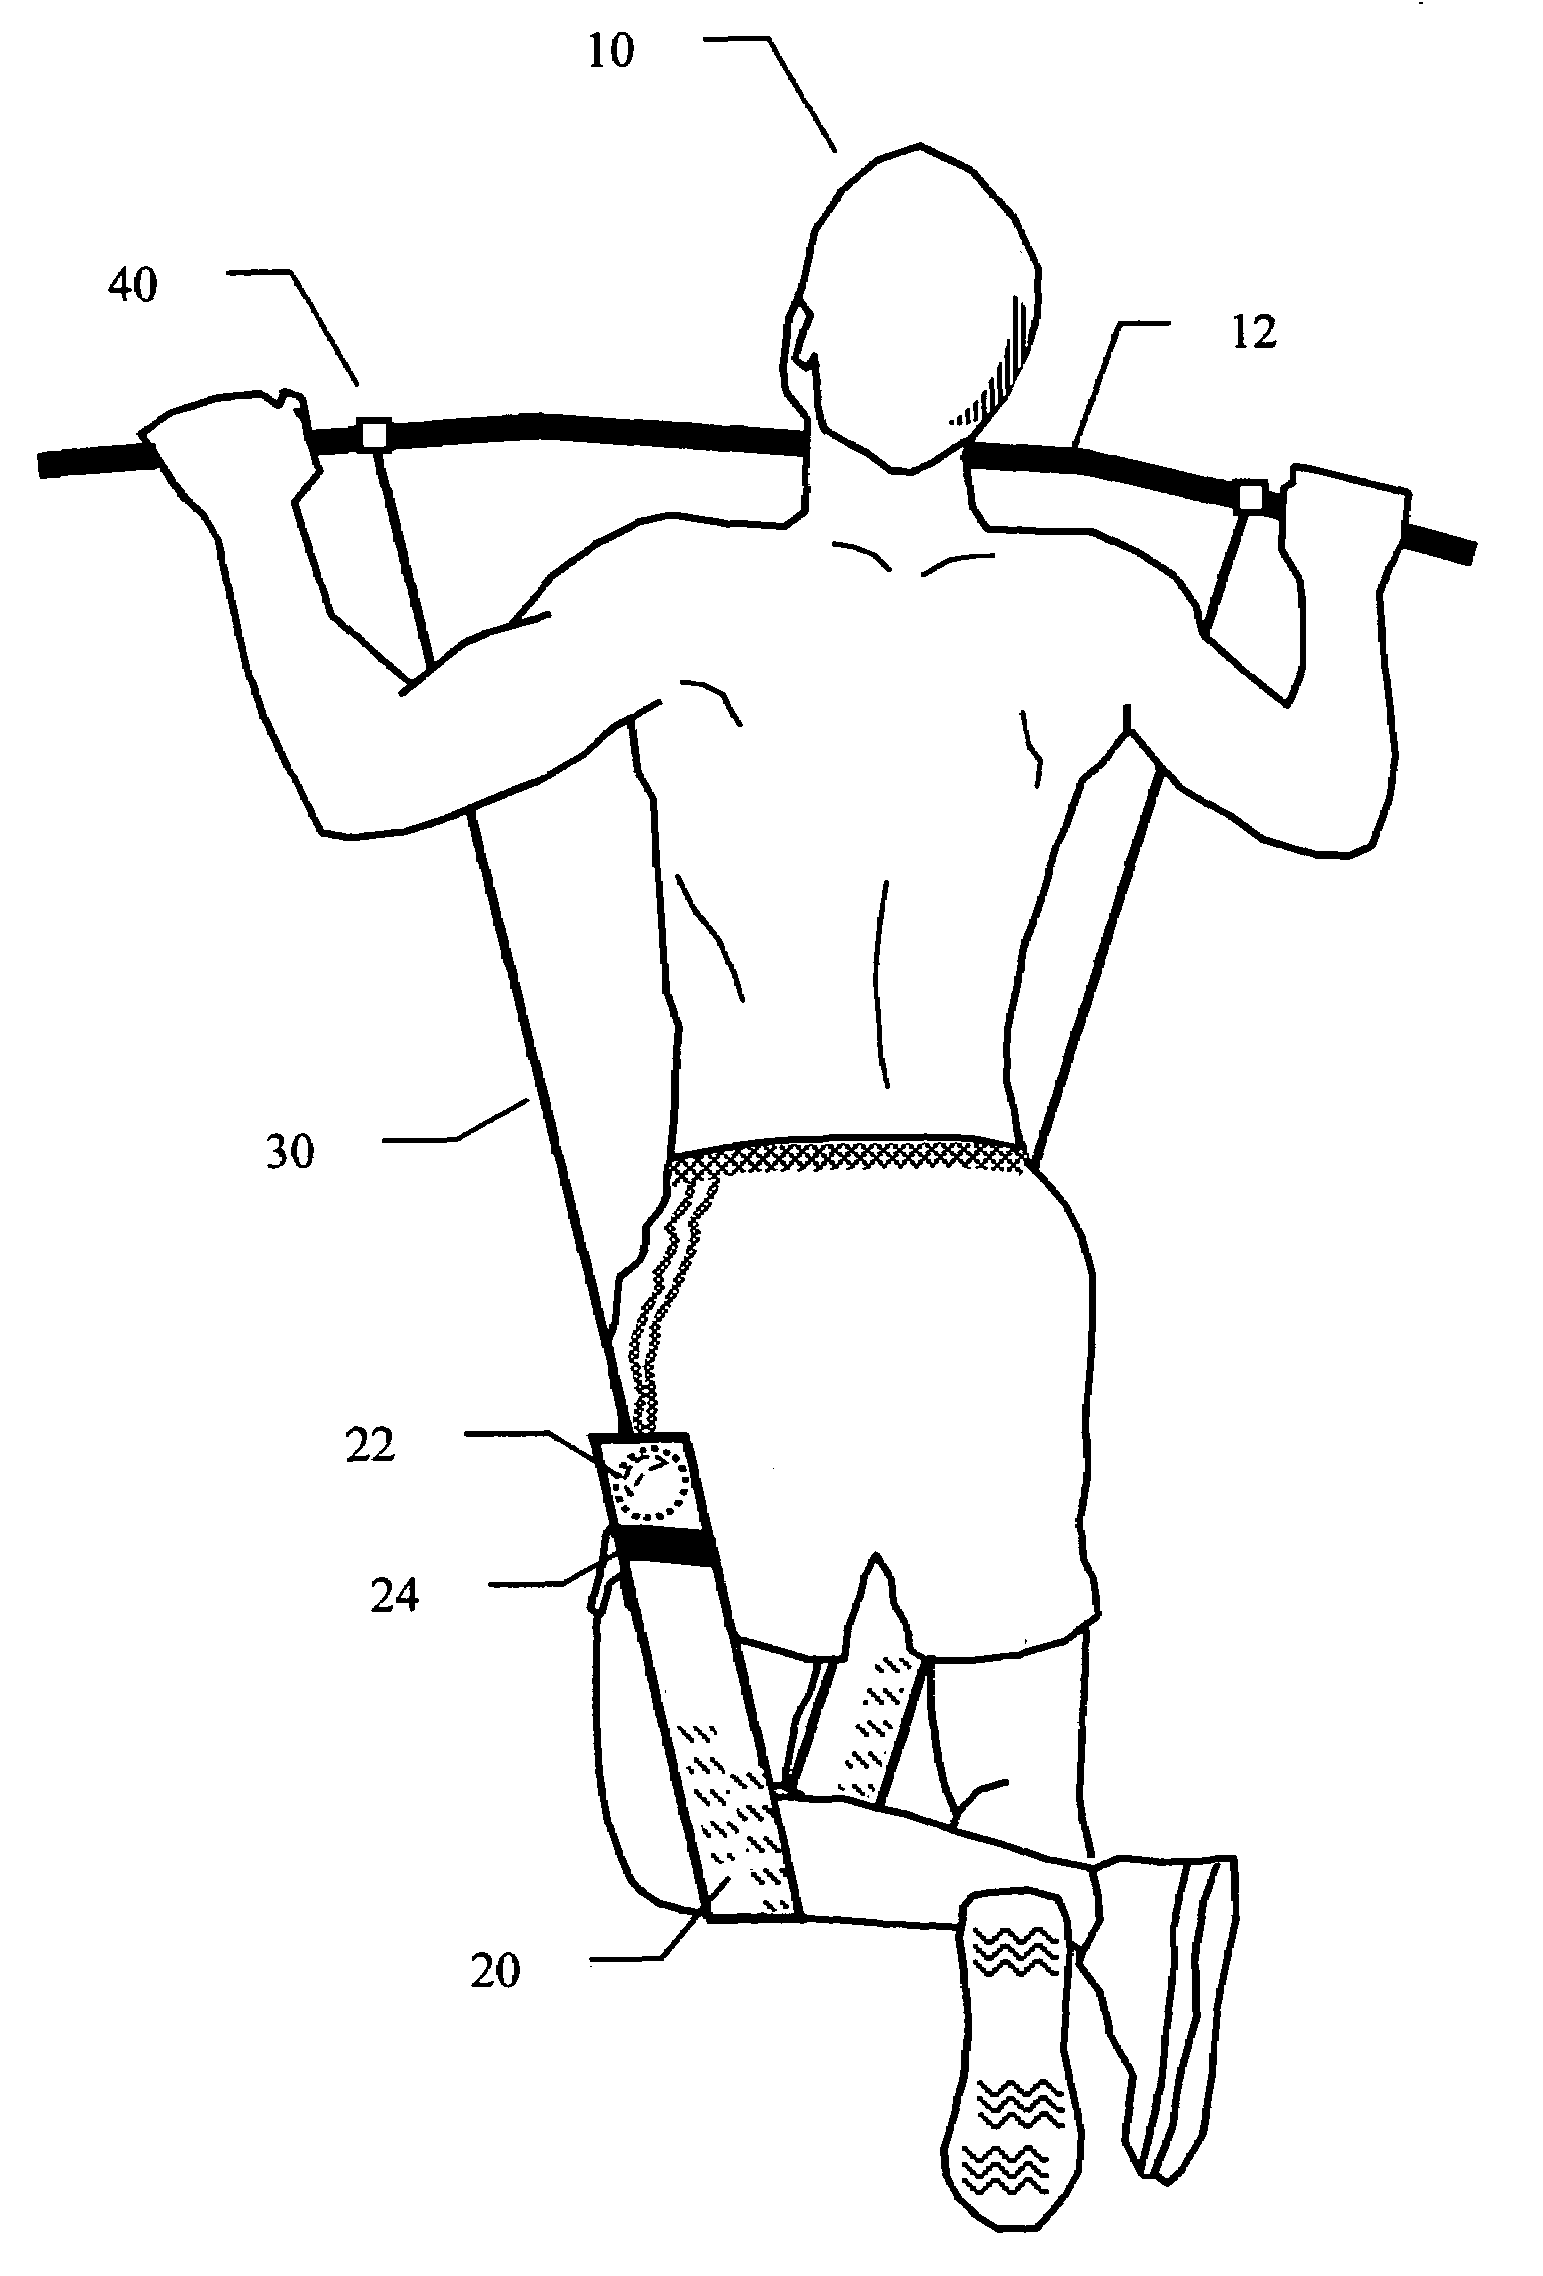 Portable device for assisting chin-up and dip exercises